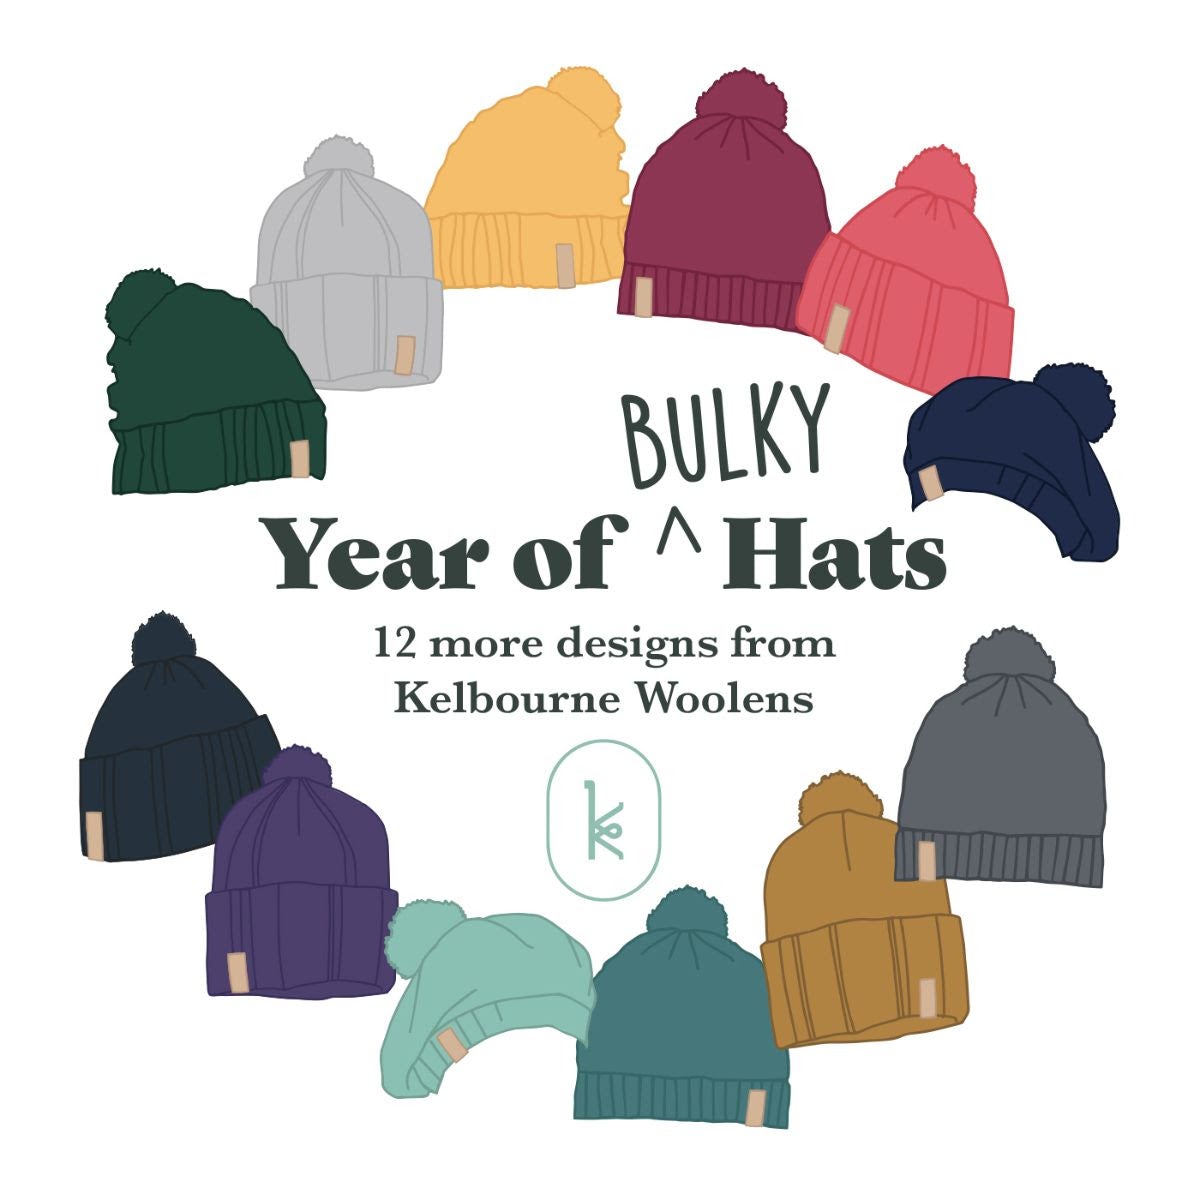 gather here classes-Year of Bulky Hats KAL-class-gather here online